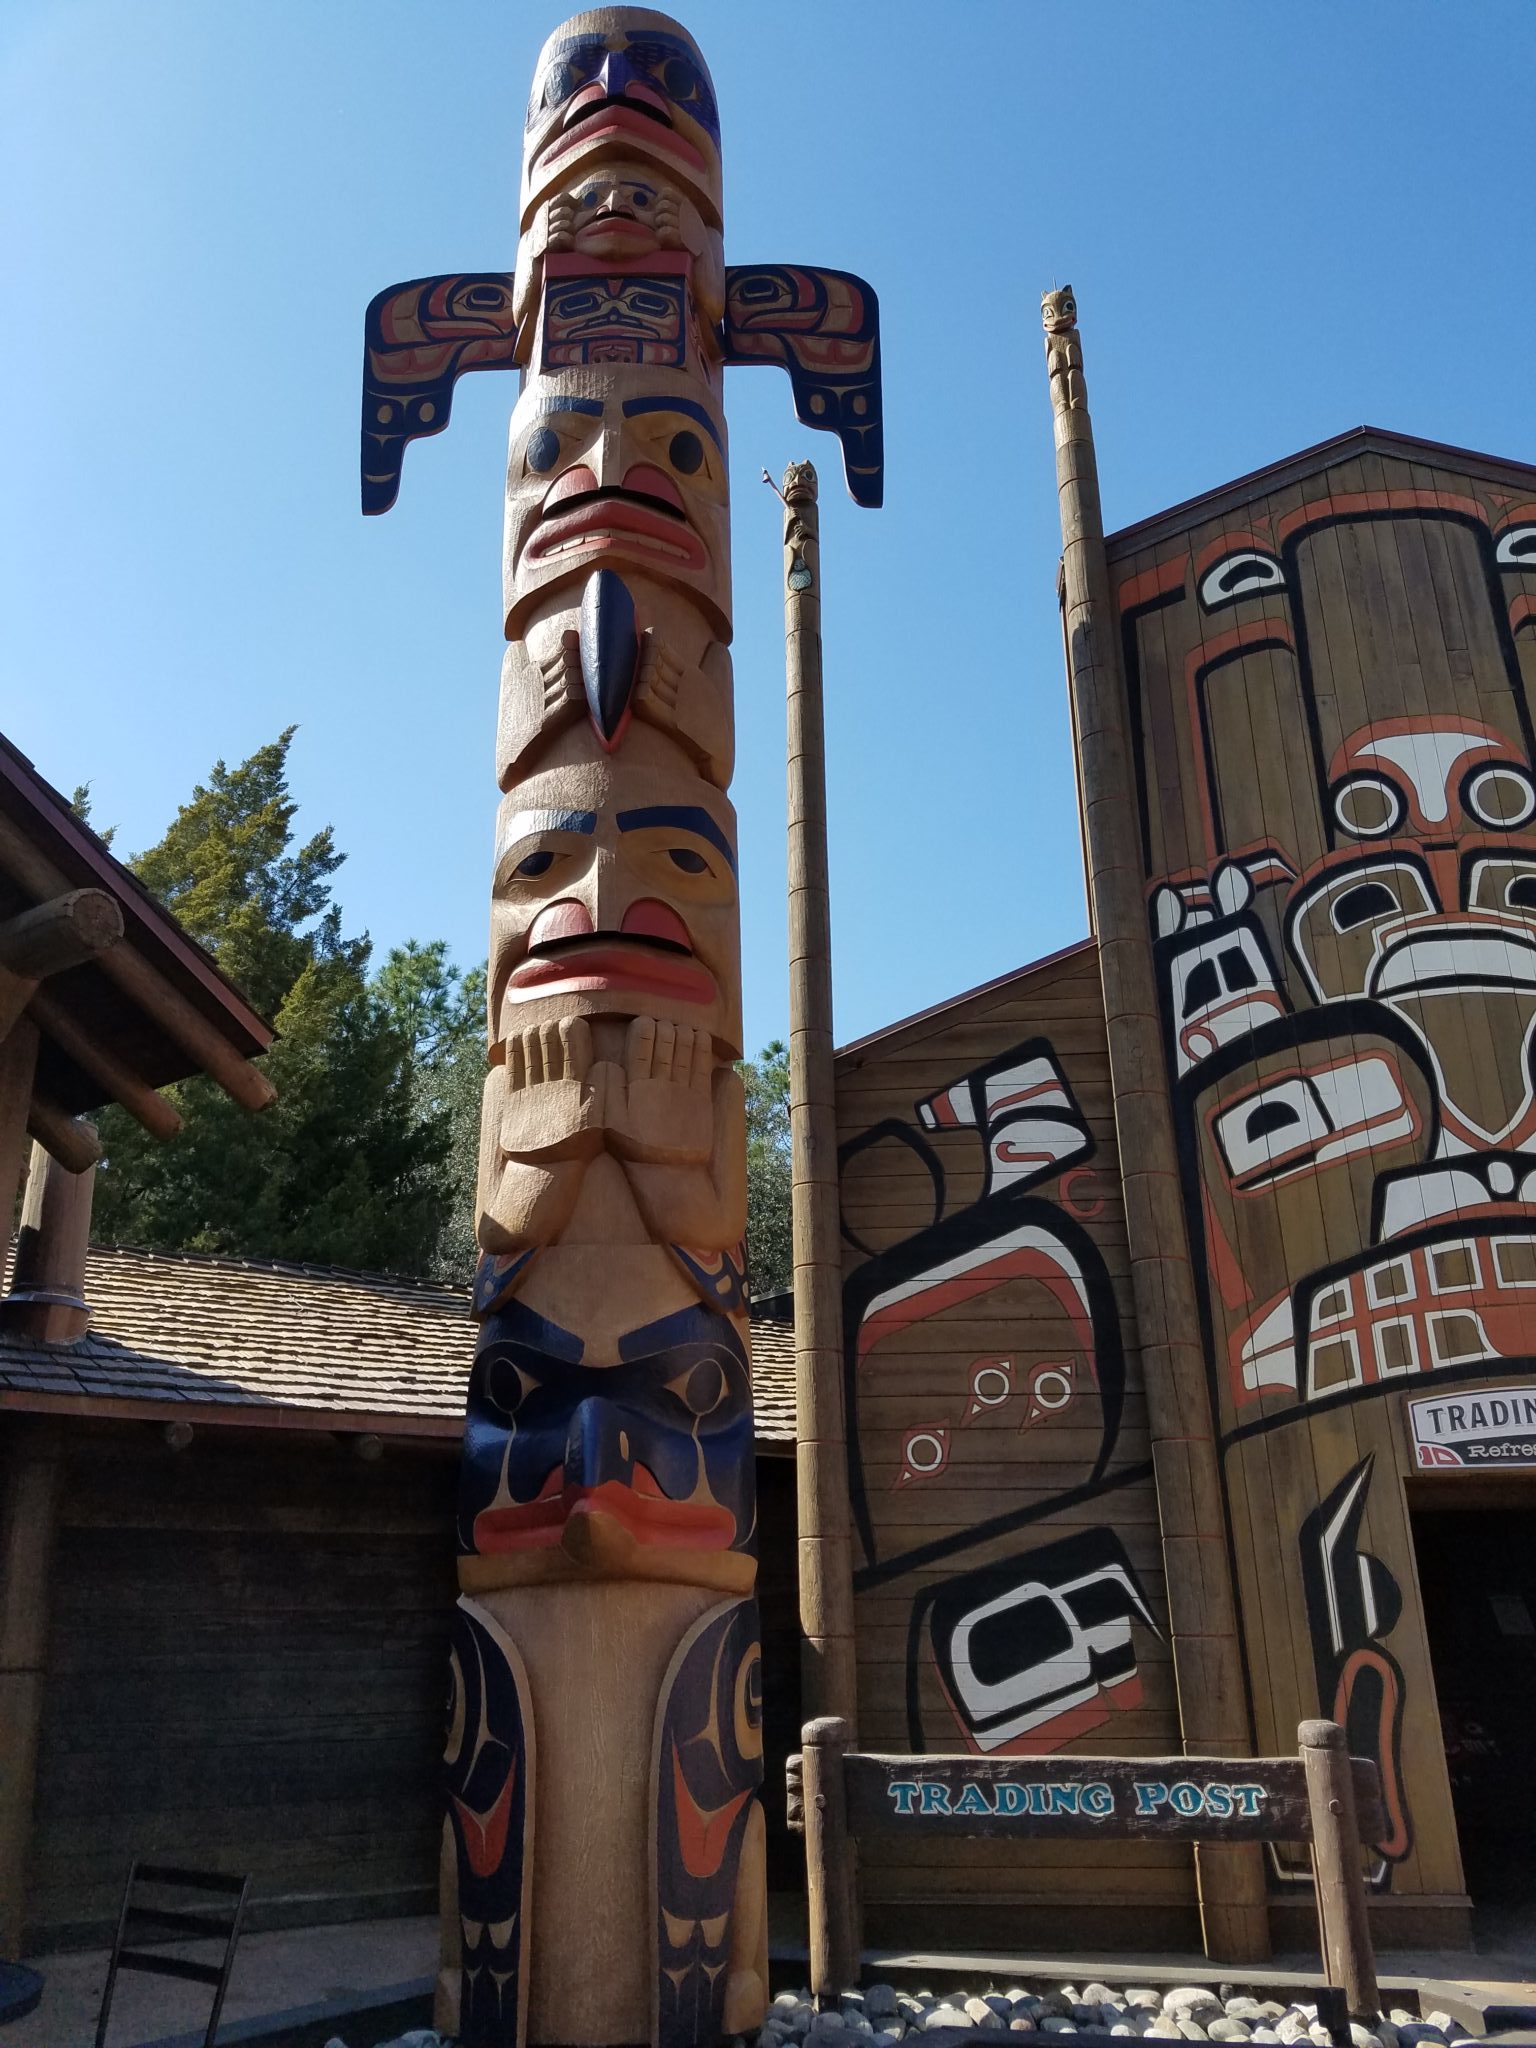 Epcot’s Canada Pavilion Adds Two New Totem Poles and Refurbishes Original